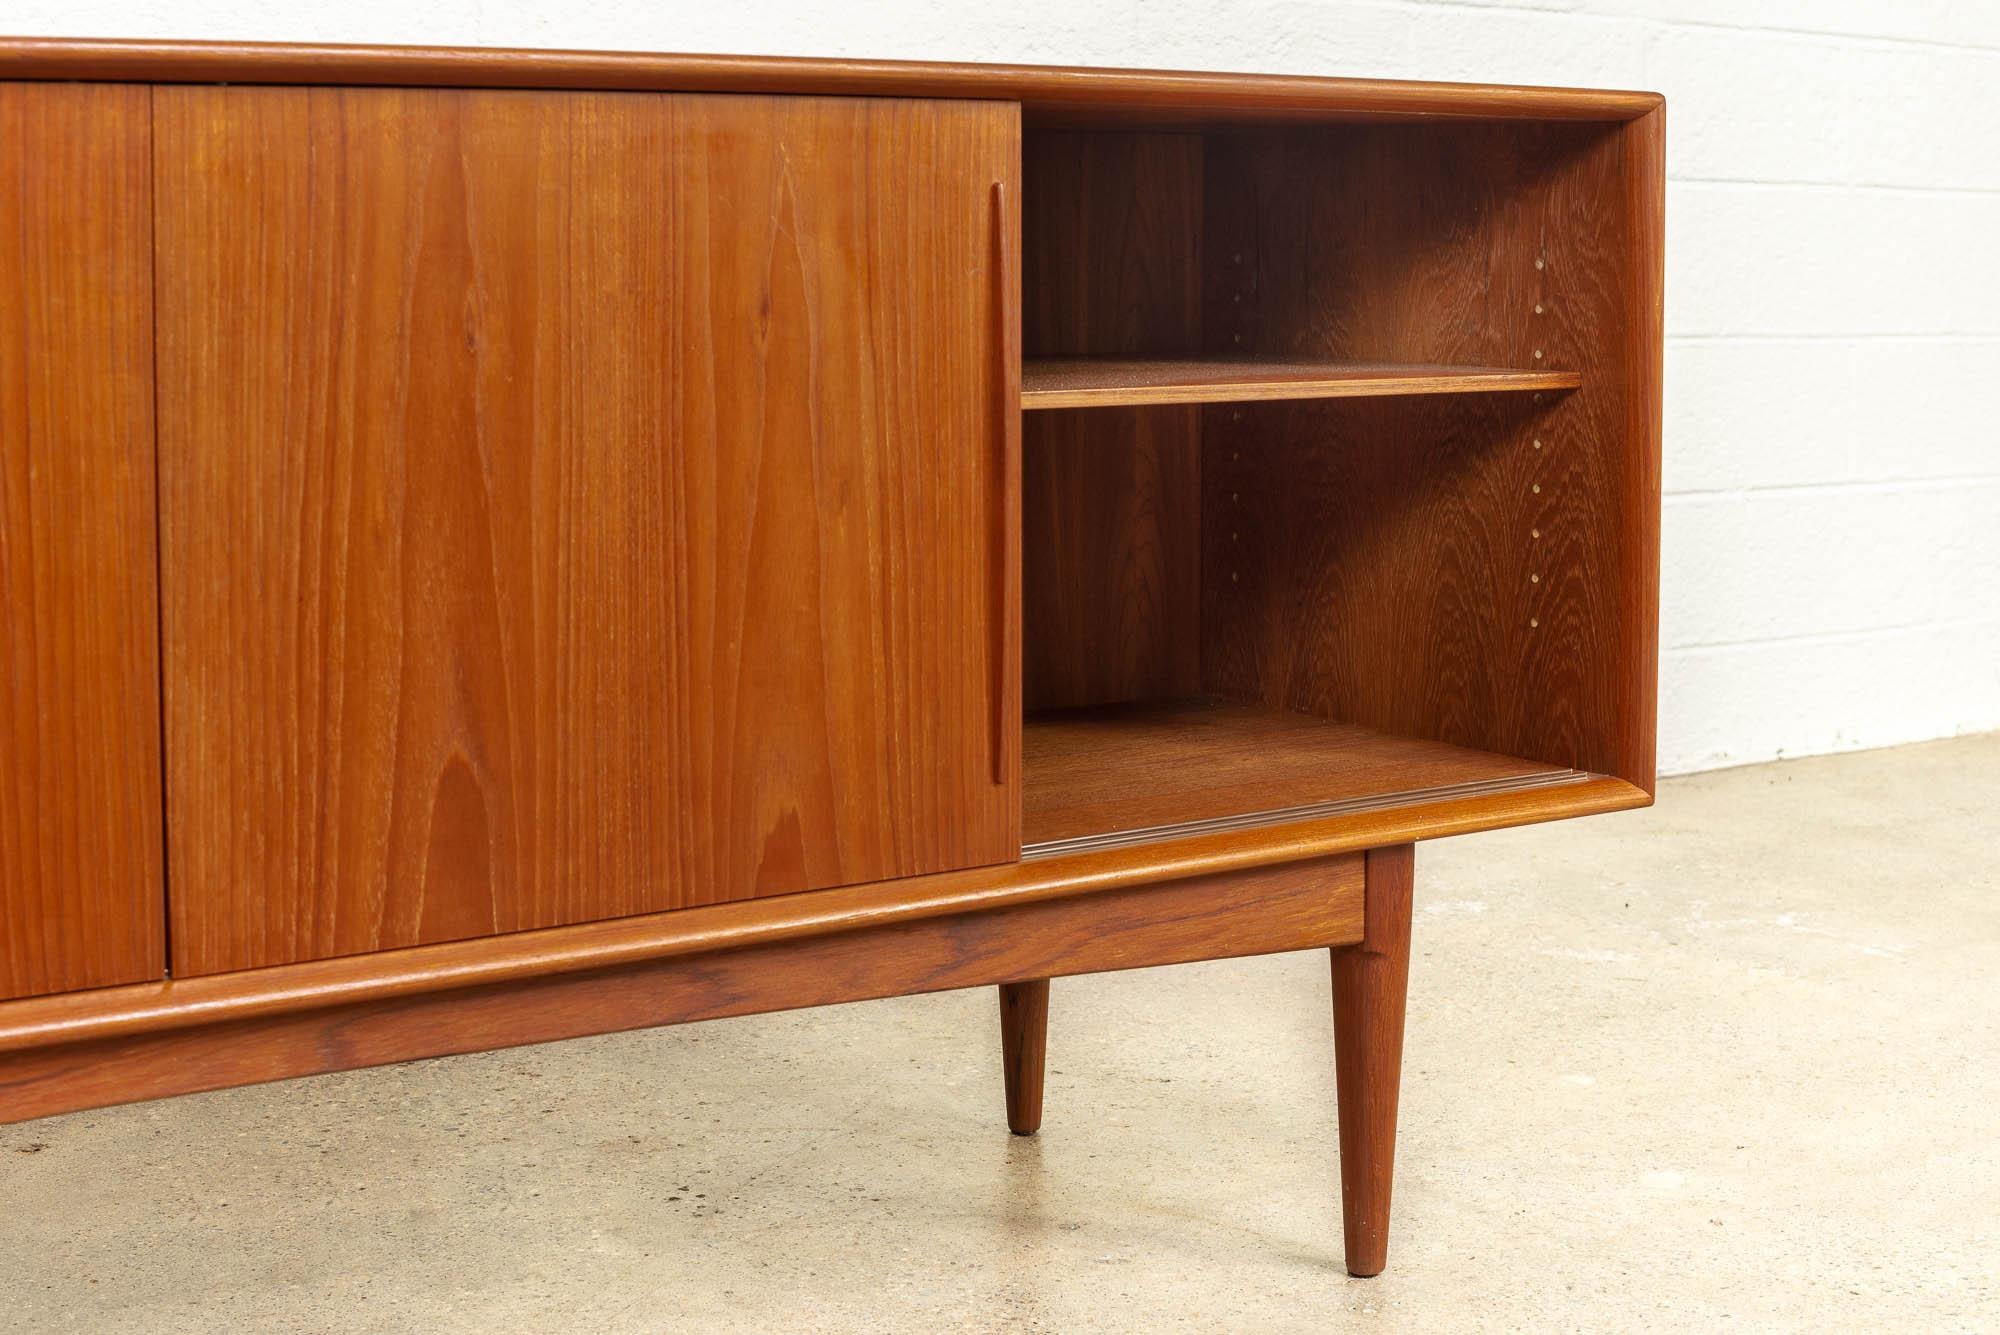 This exceptional vintage midcentury Danish modern Bernhard Pedersen & Son credenza sideboard was made in Denmark circa 1960. Expertly crafted from teak with beautiful grain pattern, this extra wide cabinet feature four sliding doors with sculpted